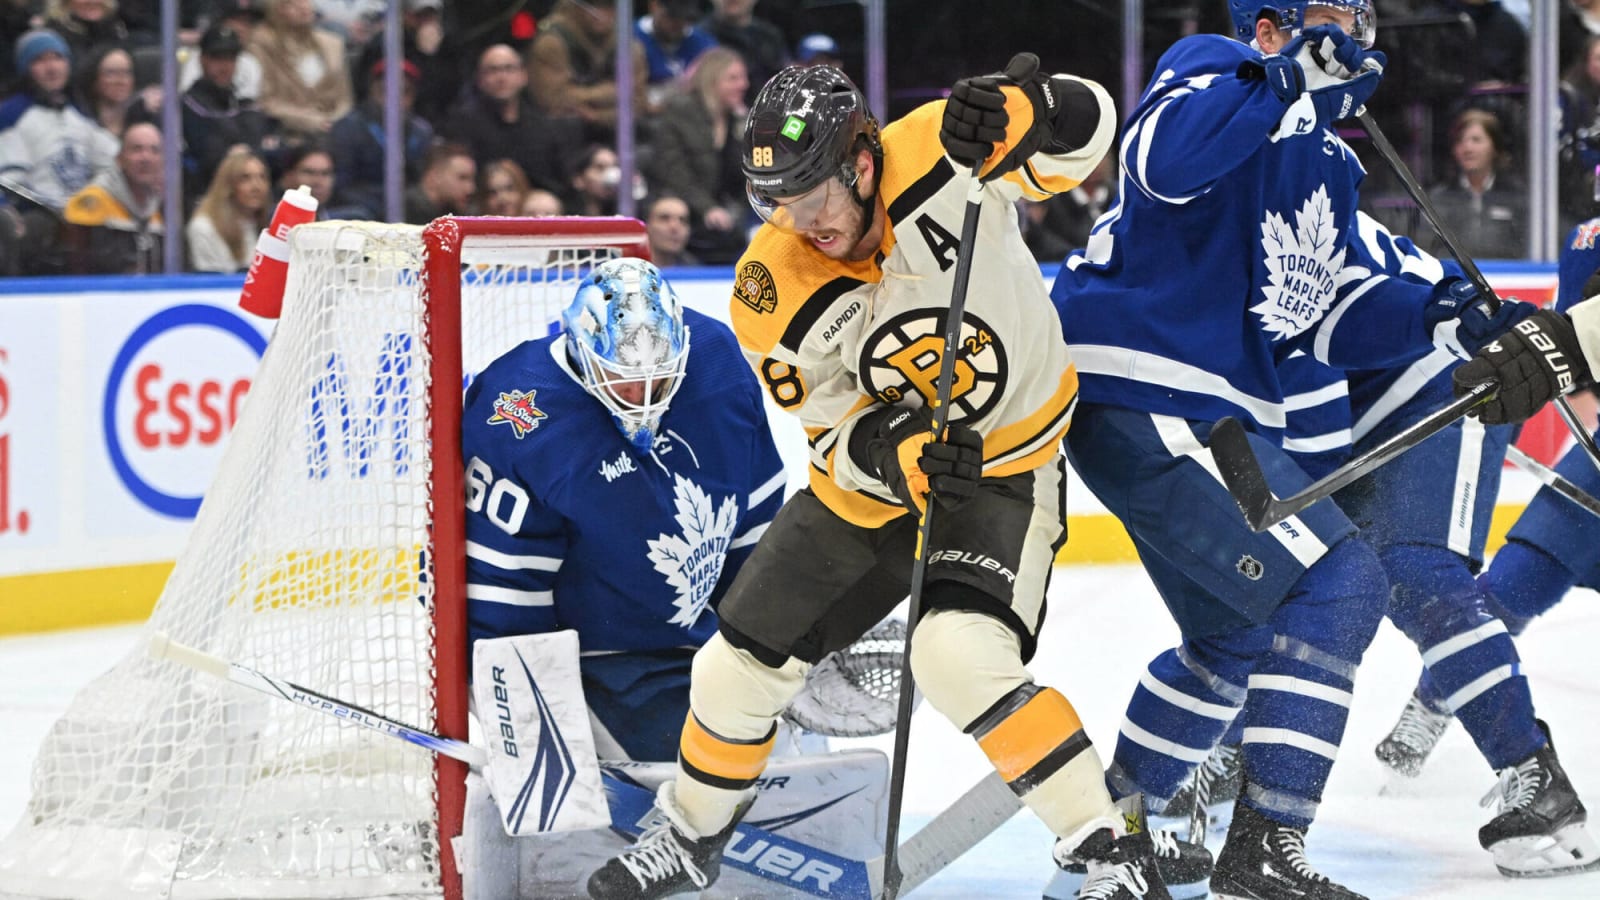 Maple Leafs vs Bruins Game 5 starting lineups and other notes